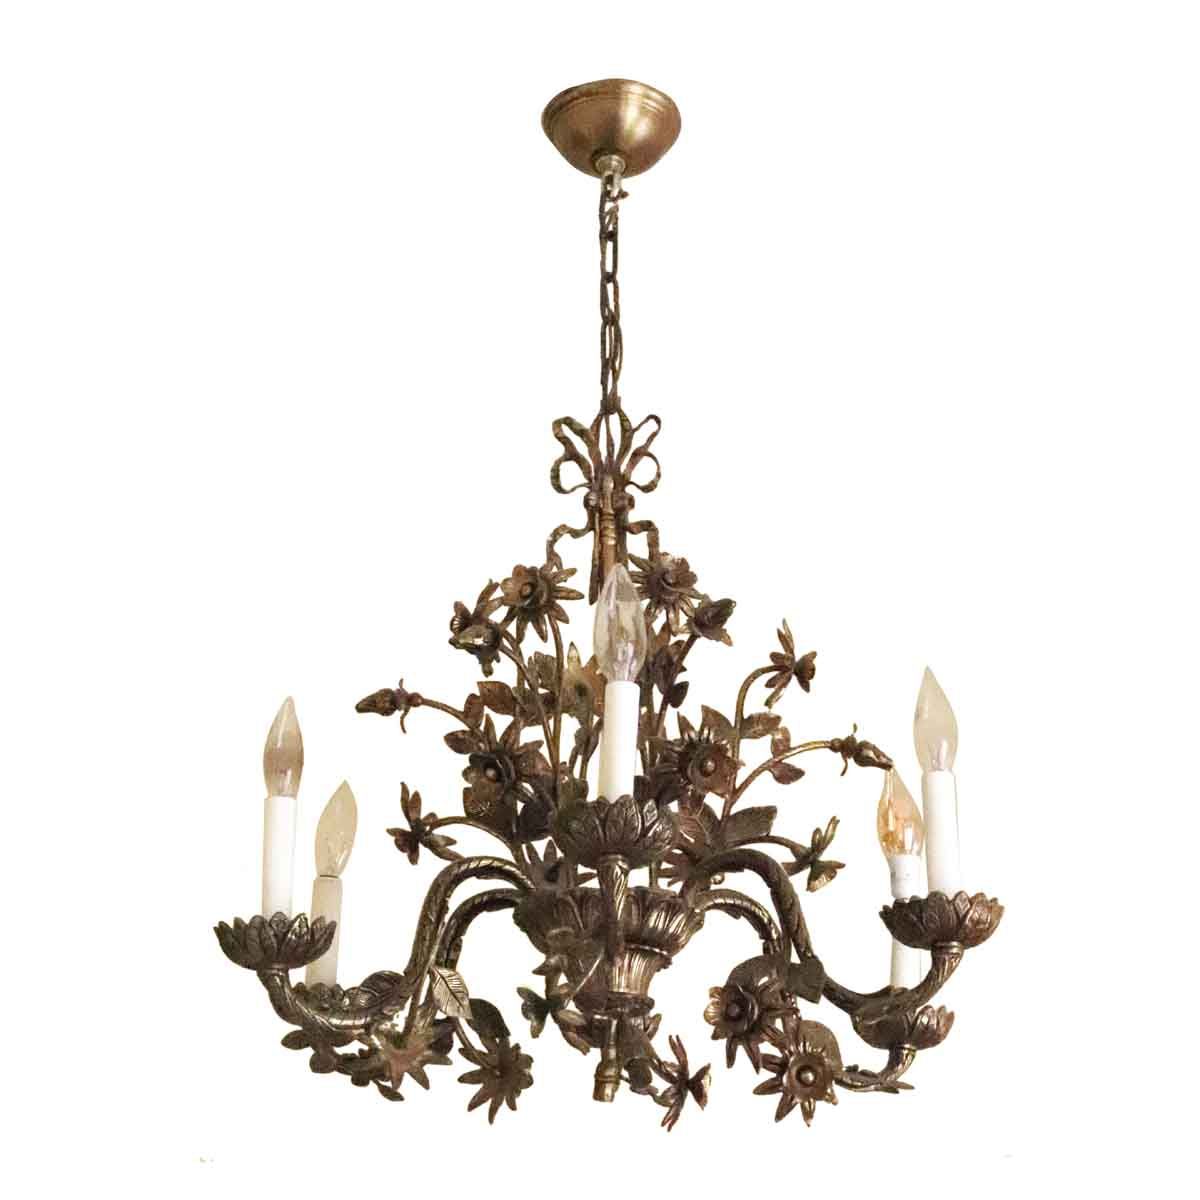 Salvaged Waldorf Brass Six Light Floral Chandelier | Olde Intended For Natural Brass Six Light Chandeliers (View 4 of 15)